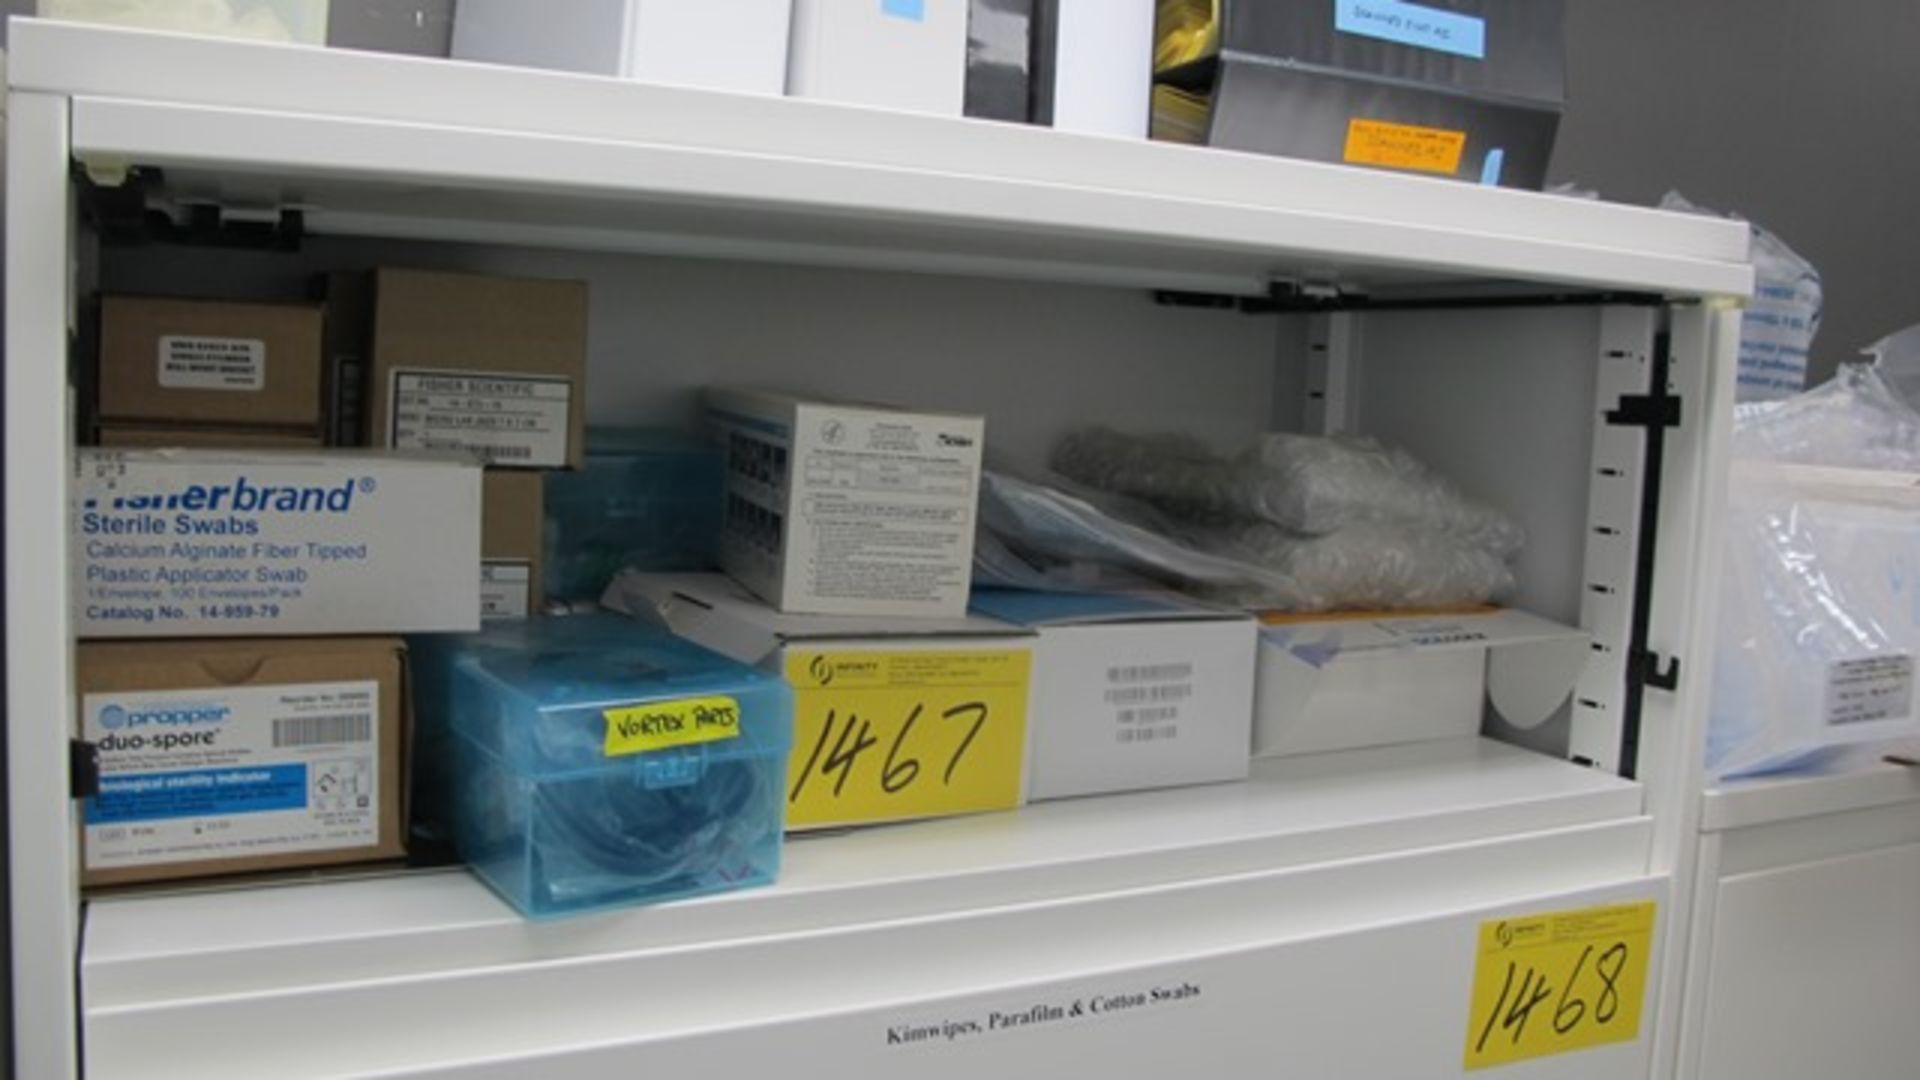 CONTENTS OFFICE CABINET - LAB JACKETS, SWABS, EP TIPS, ETC. (NO CABINET) (LAB)